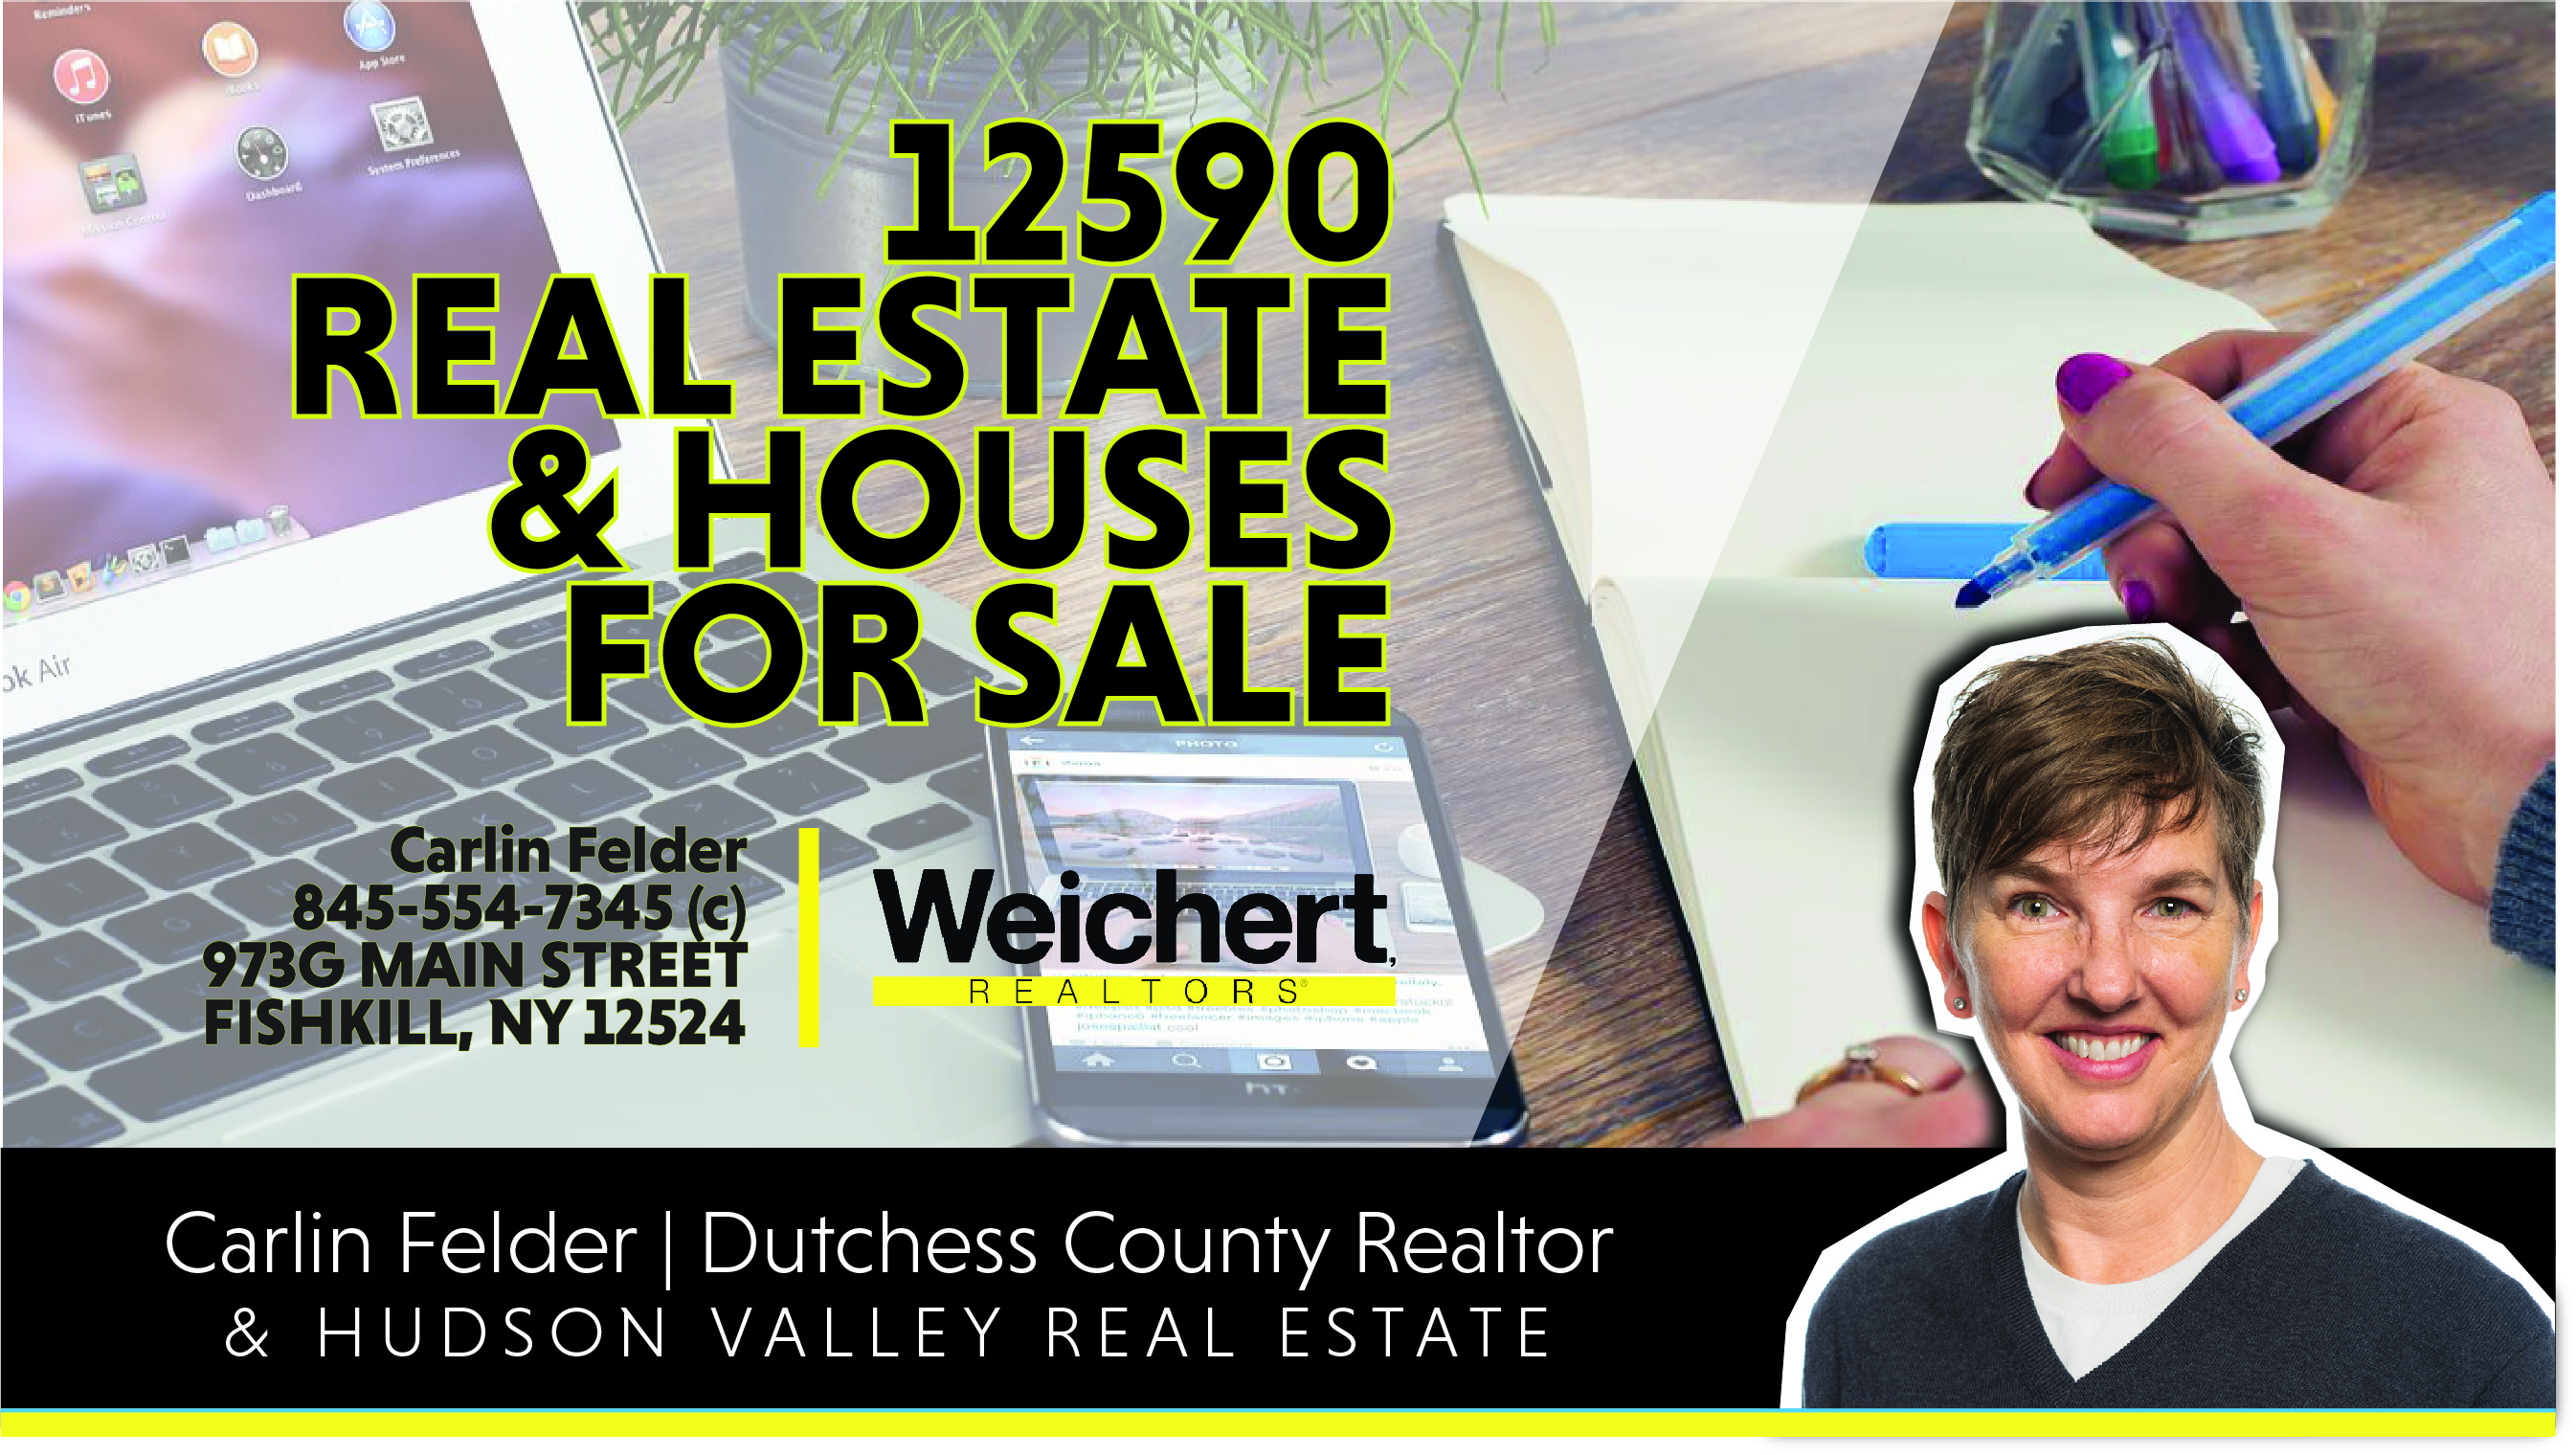 12590 Homes for Sale – Dutchess County Real Estate